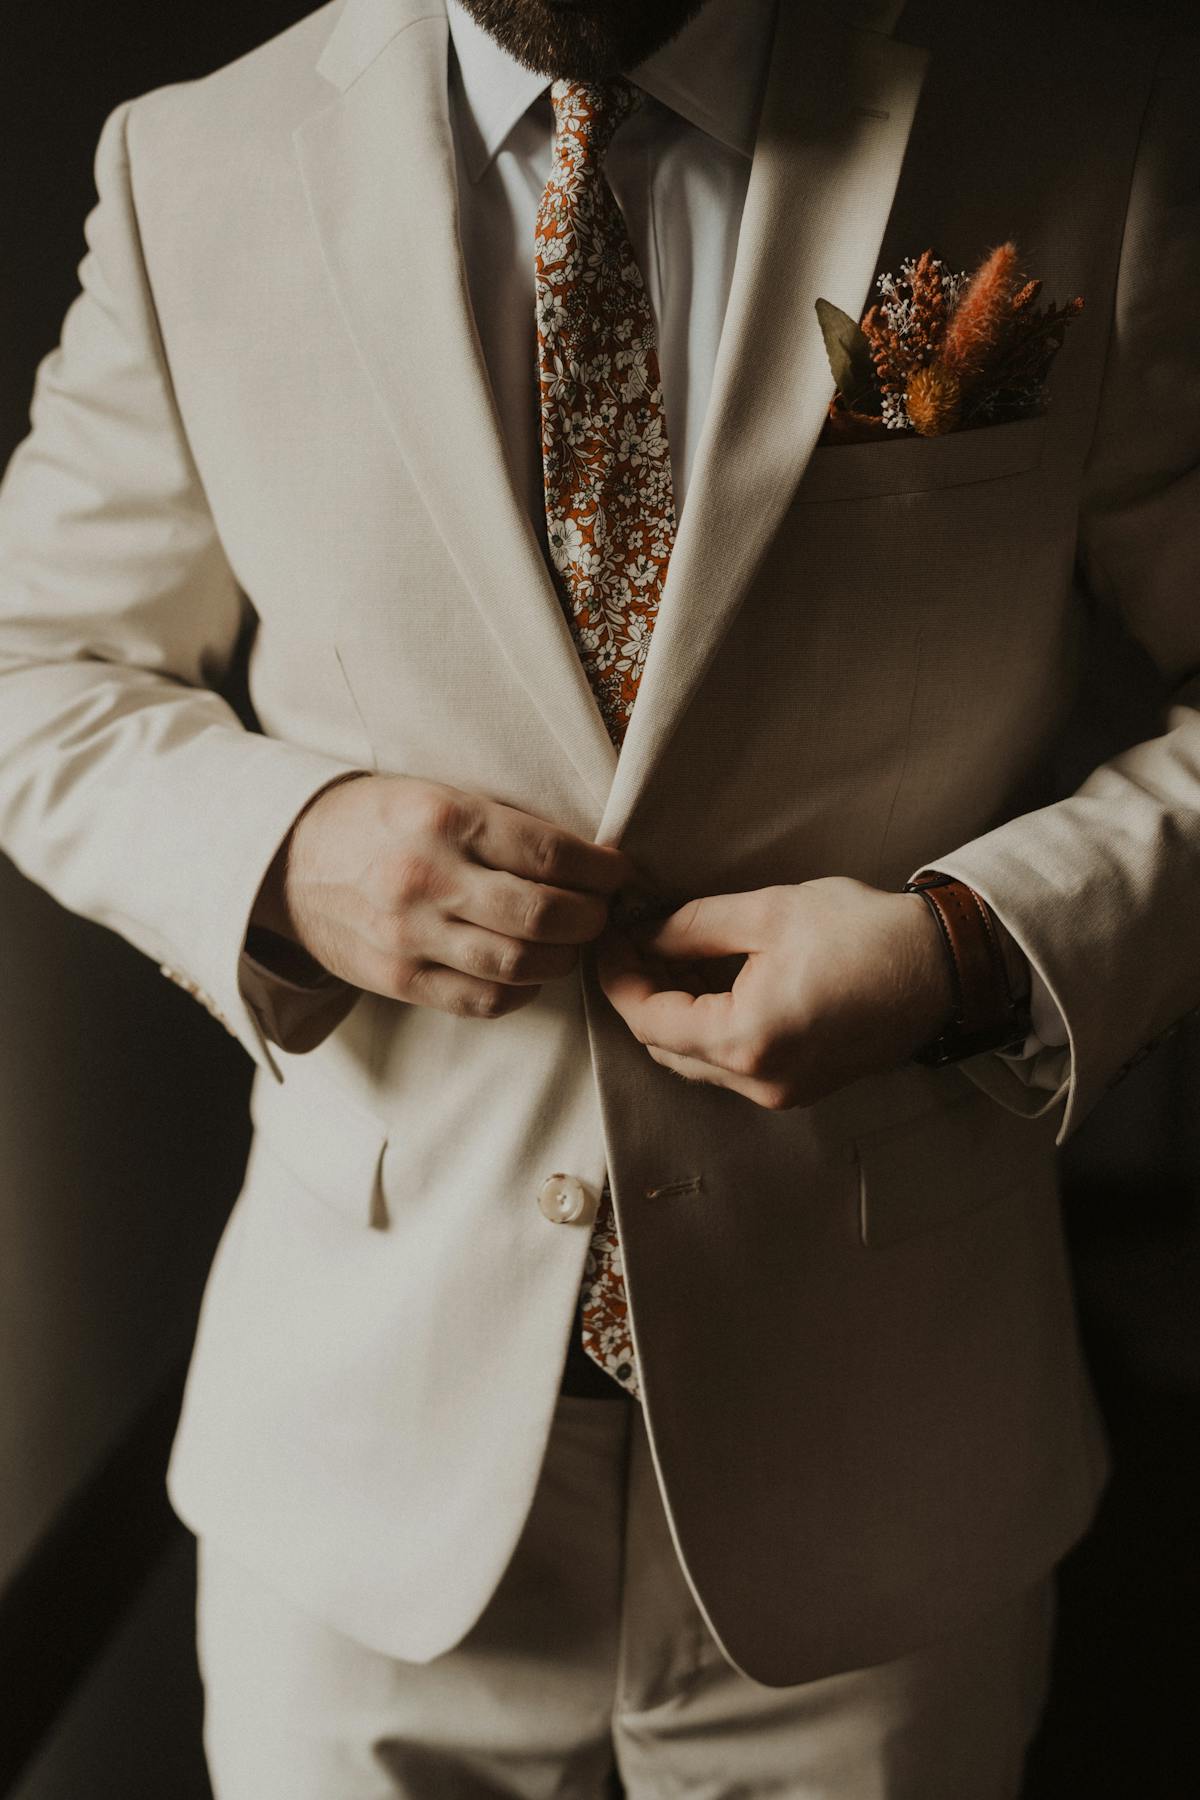 Tan wedding suit with rust orange floral tie and pocket boutonniere floral arrangement for groomsmen.